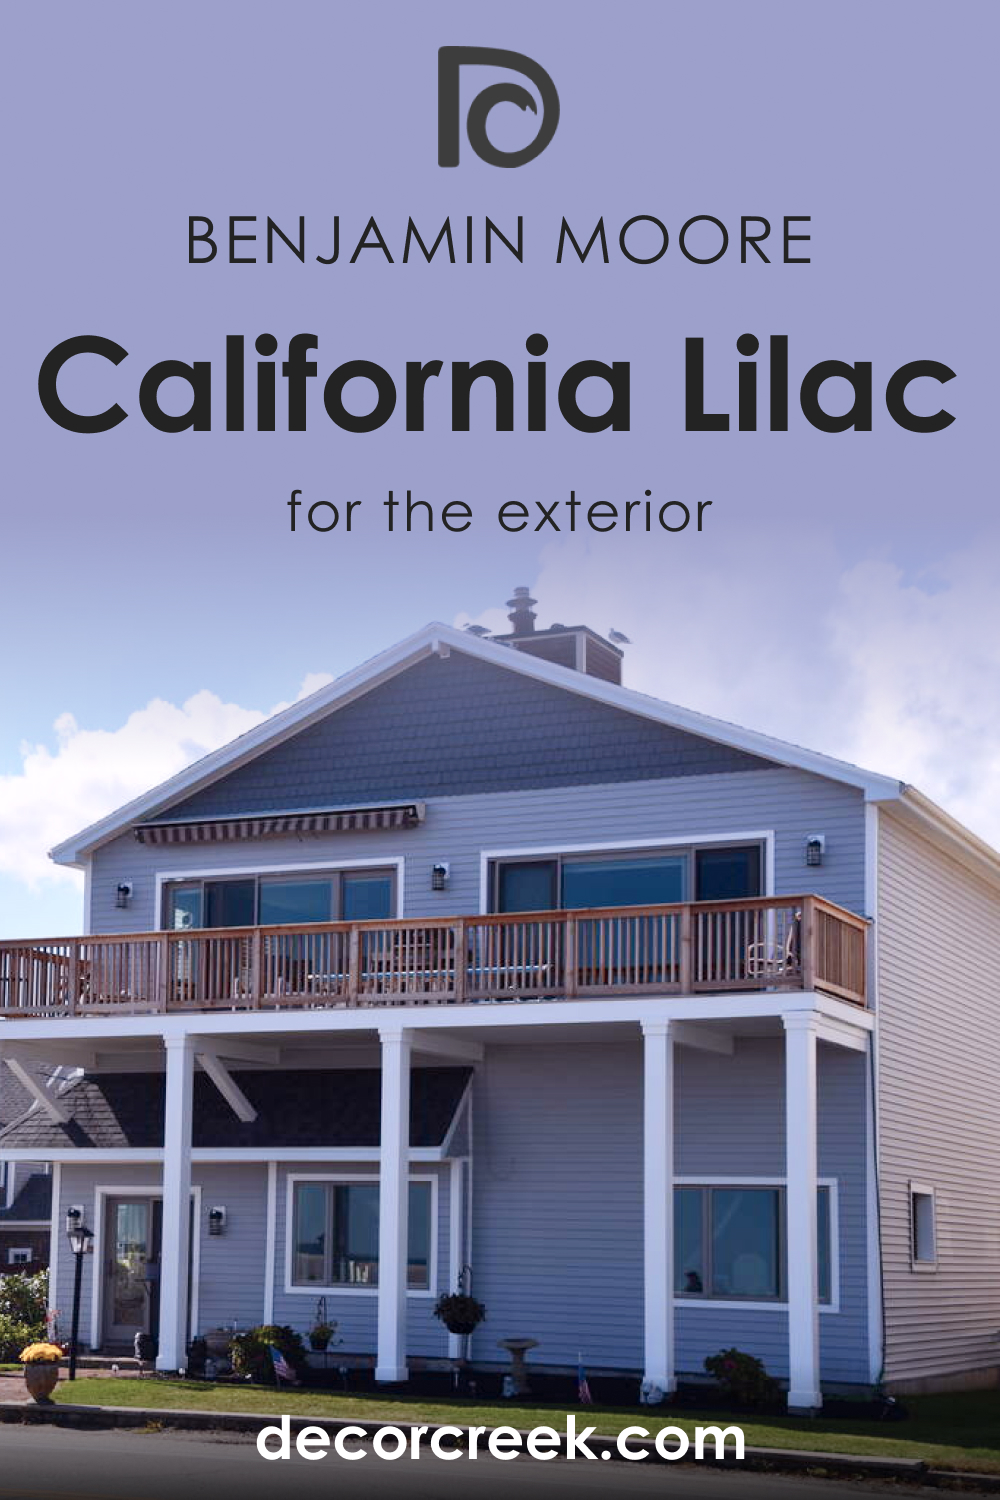 How to Use California Lilac 2068-40 for an Exterior?